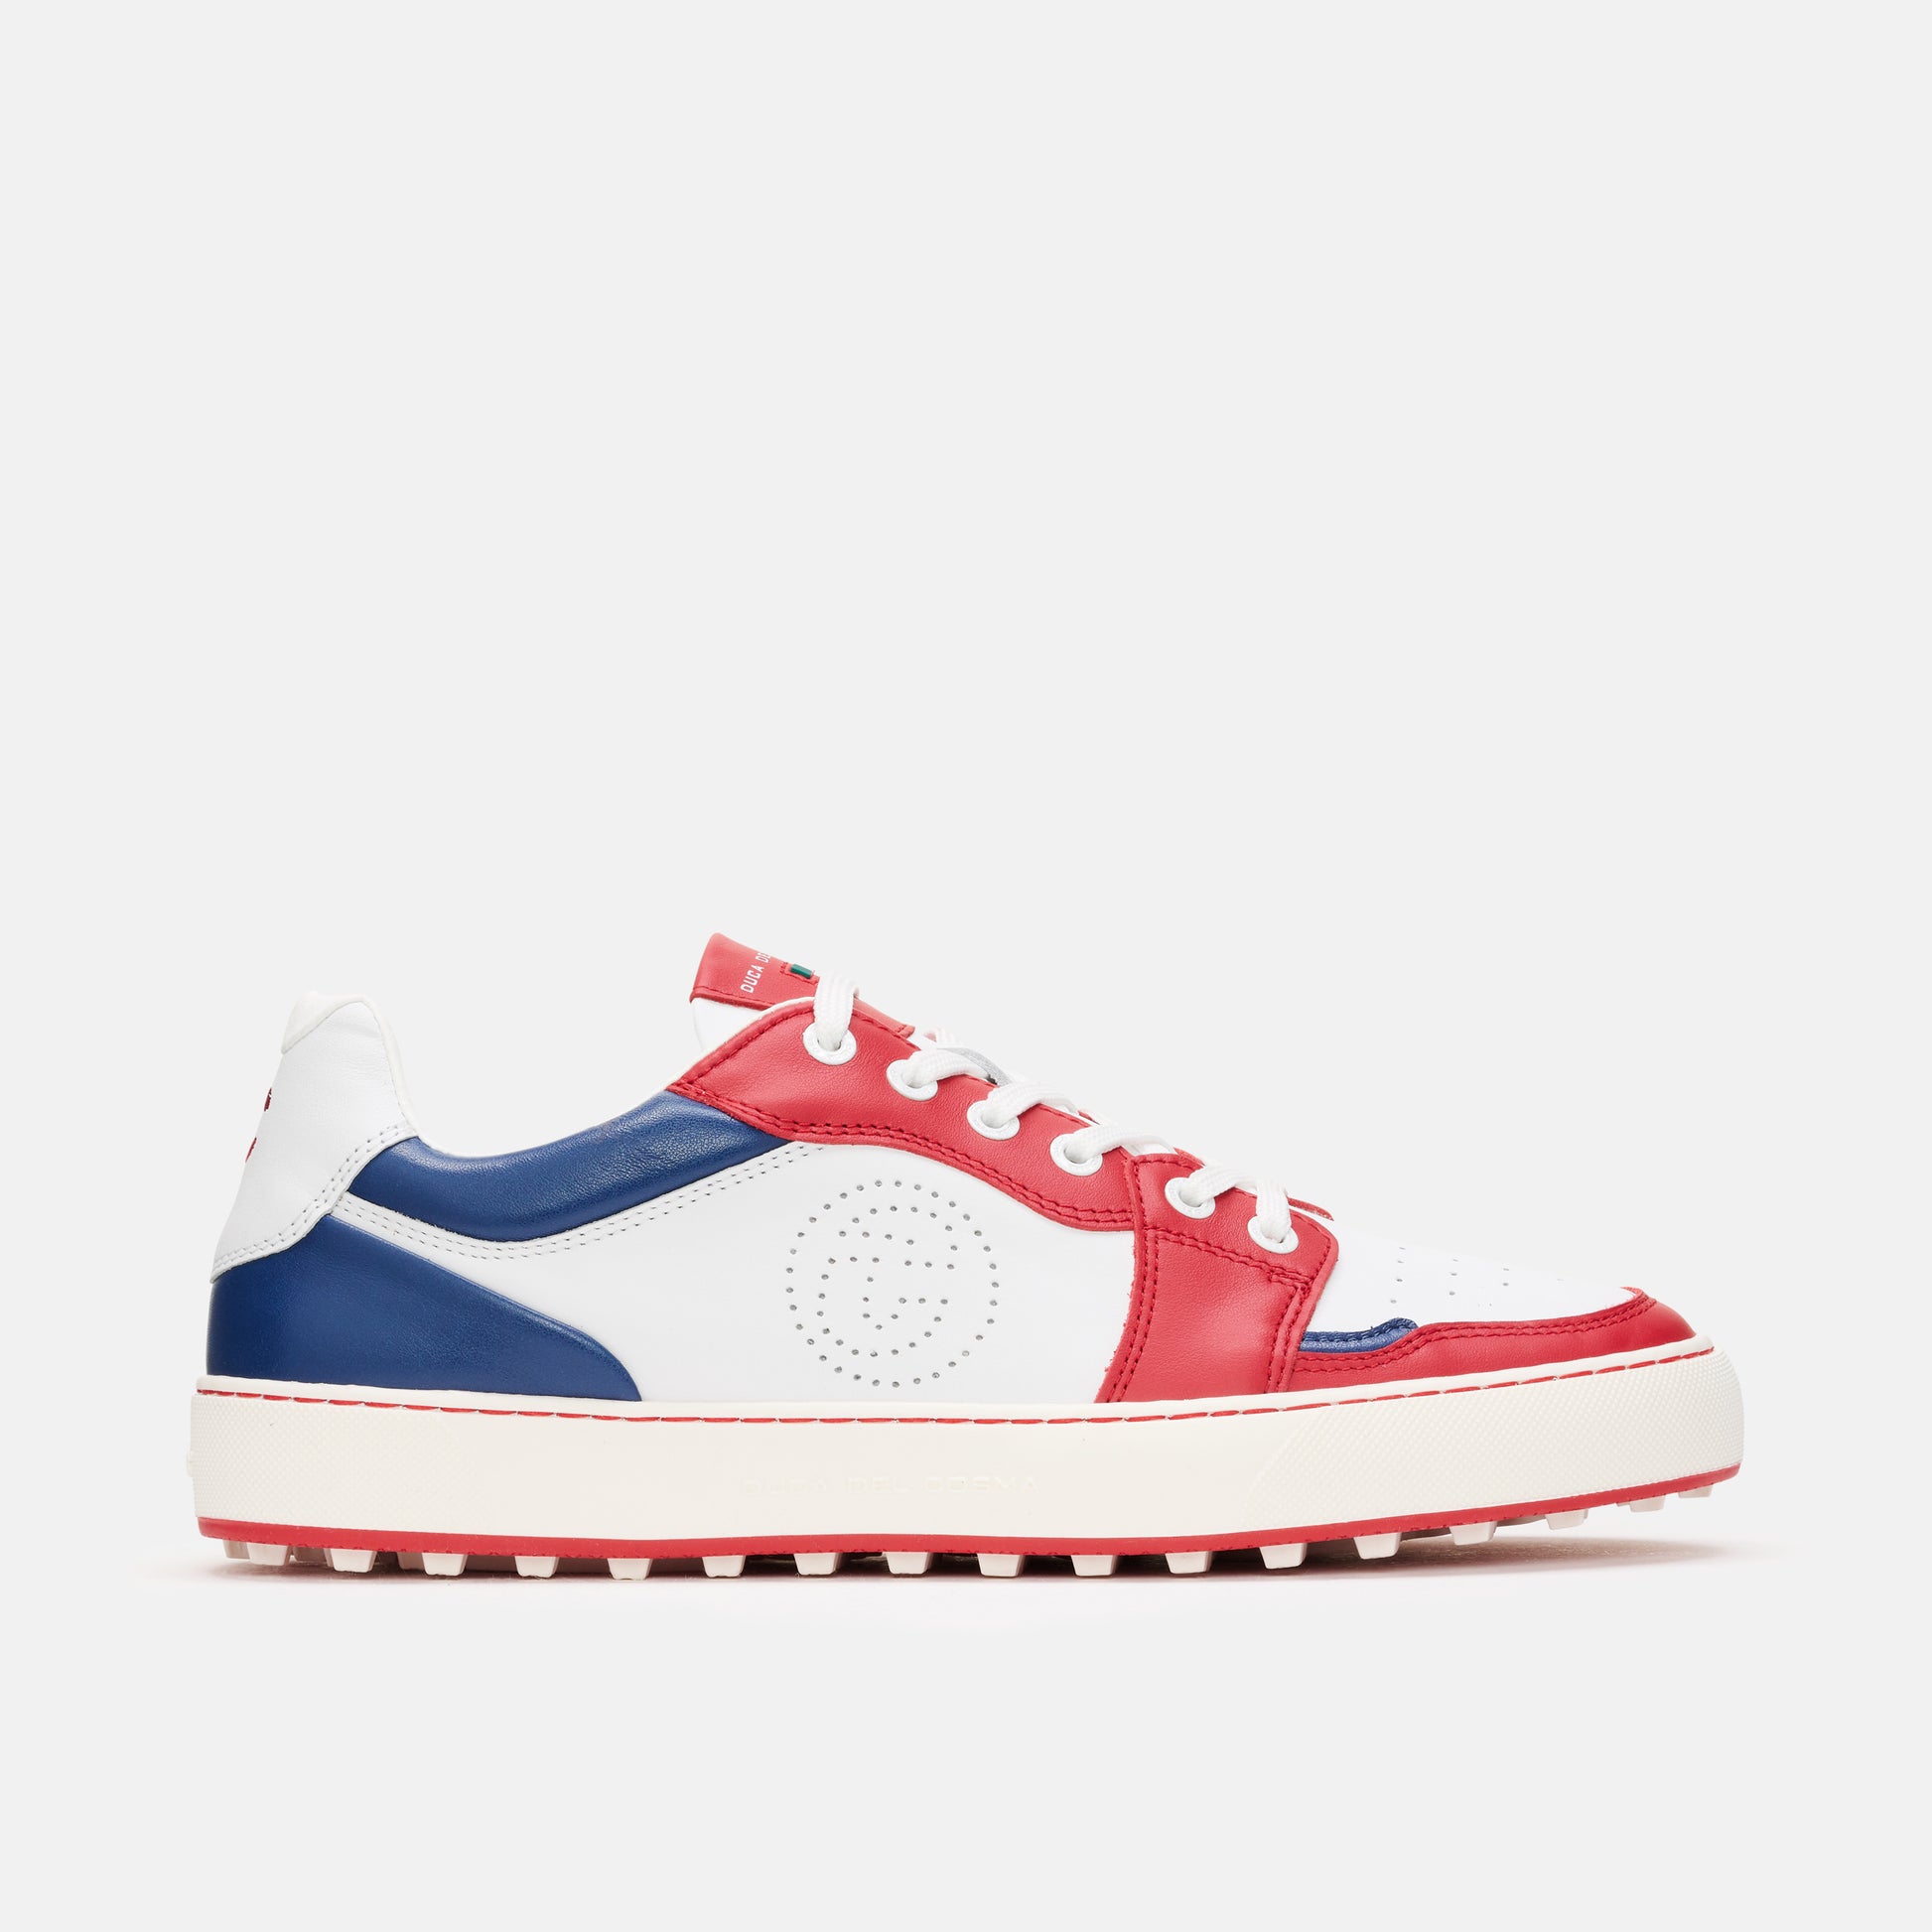 White Golf Shoes, Red Golf Shoes, Navy Golf Shoes, Spikeless Golf Shoes, Duca del Cosma Men's Golf Shoes, Sneaker golf shoes.